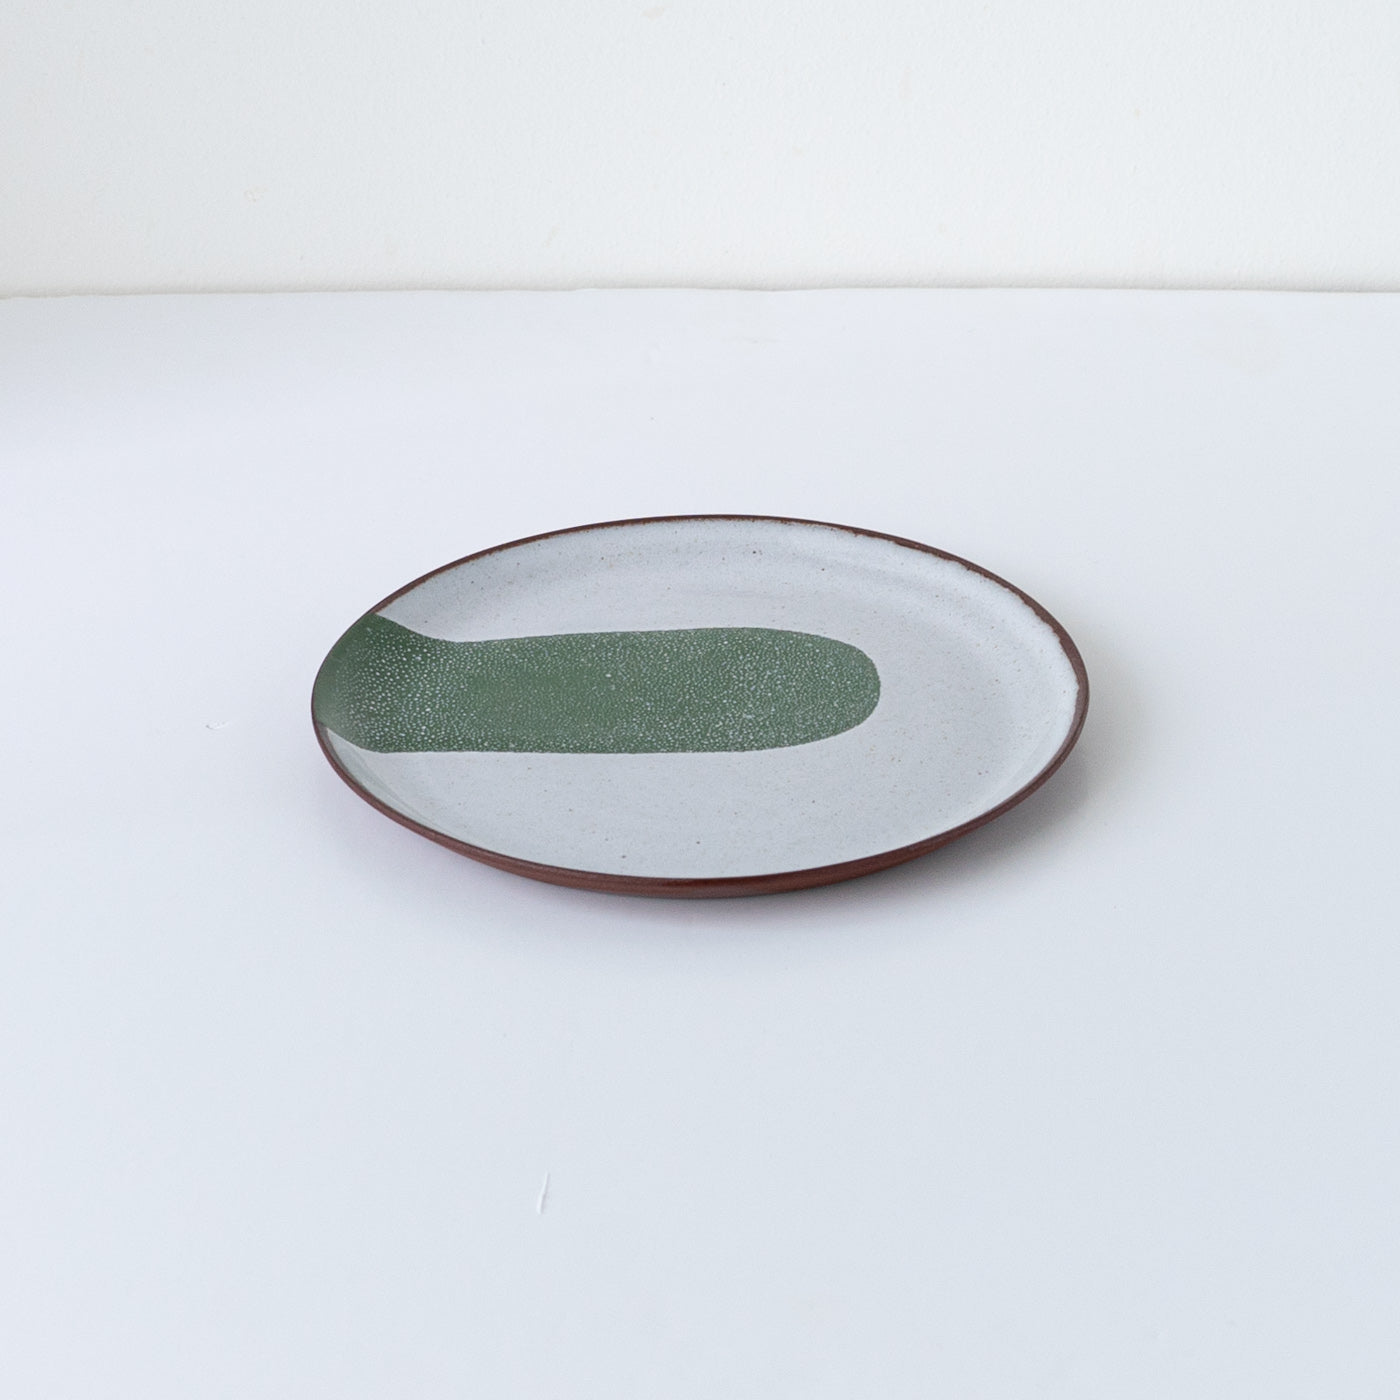 Silvia K handmade terracotta small plate with white and green decor